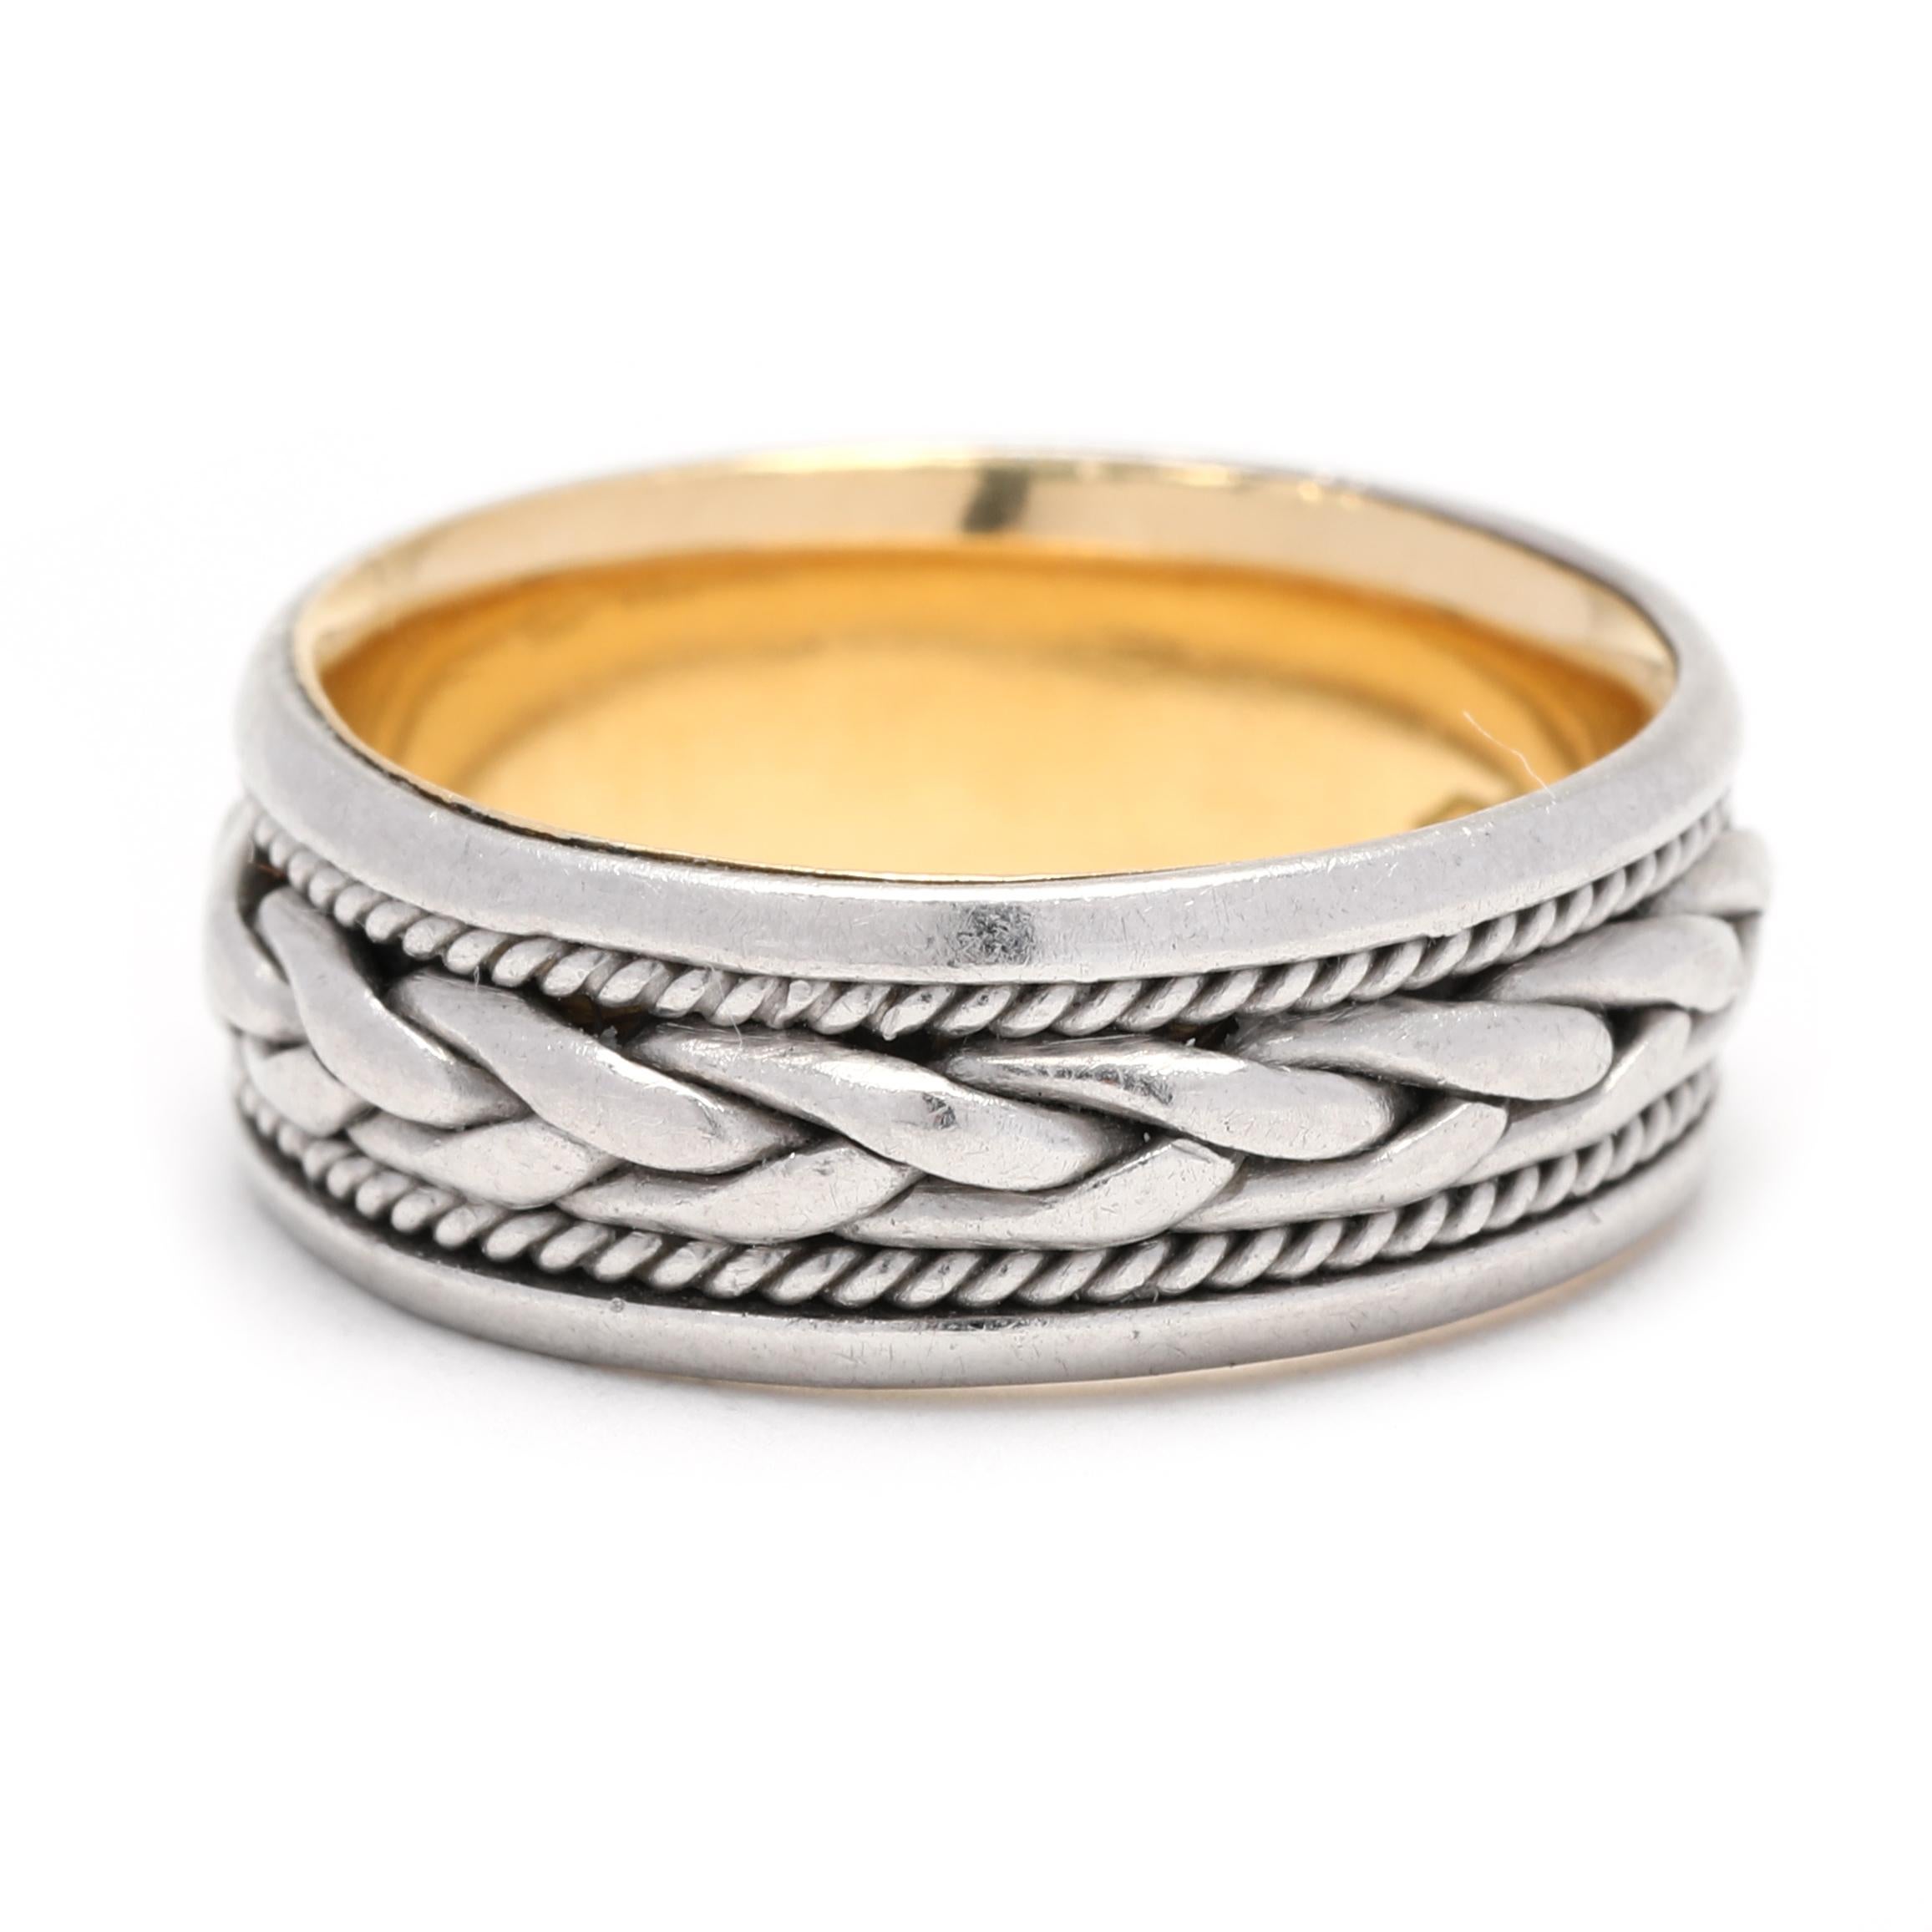 This one-of-a-kind Wide Braided Eternity Wedding Band is a stunning symbol of your eternal love. Crafted from 18K yellow gold and platinum, this beautiful ring features an intricate braid pattern that wraps all the way around the band. With a width